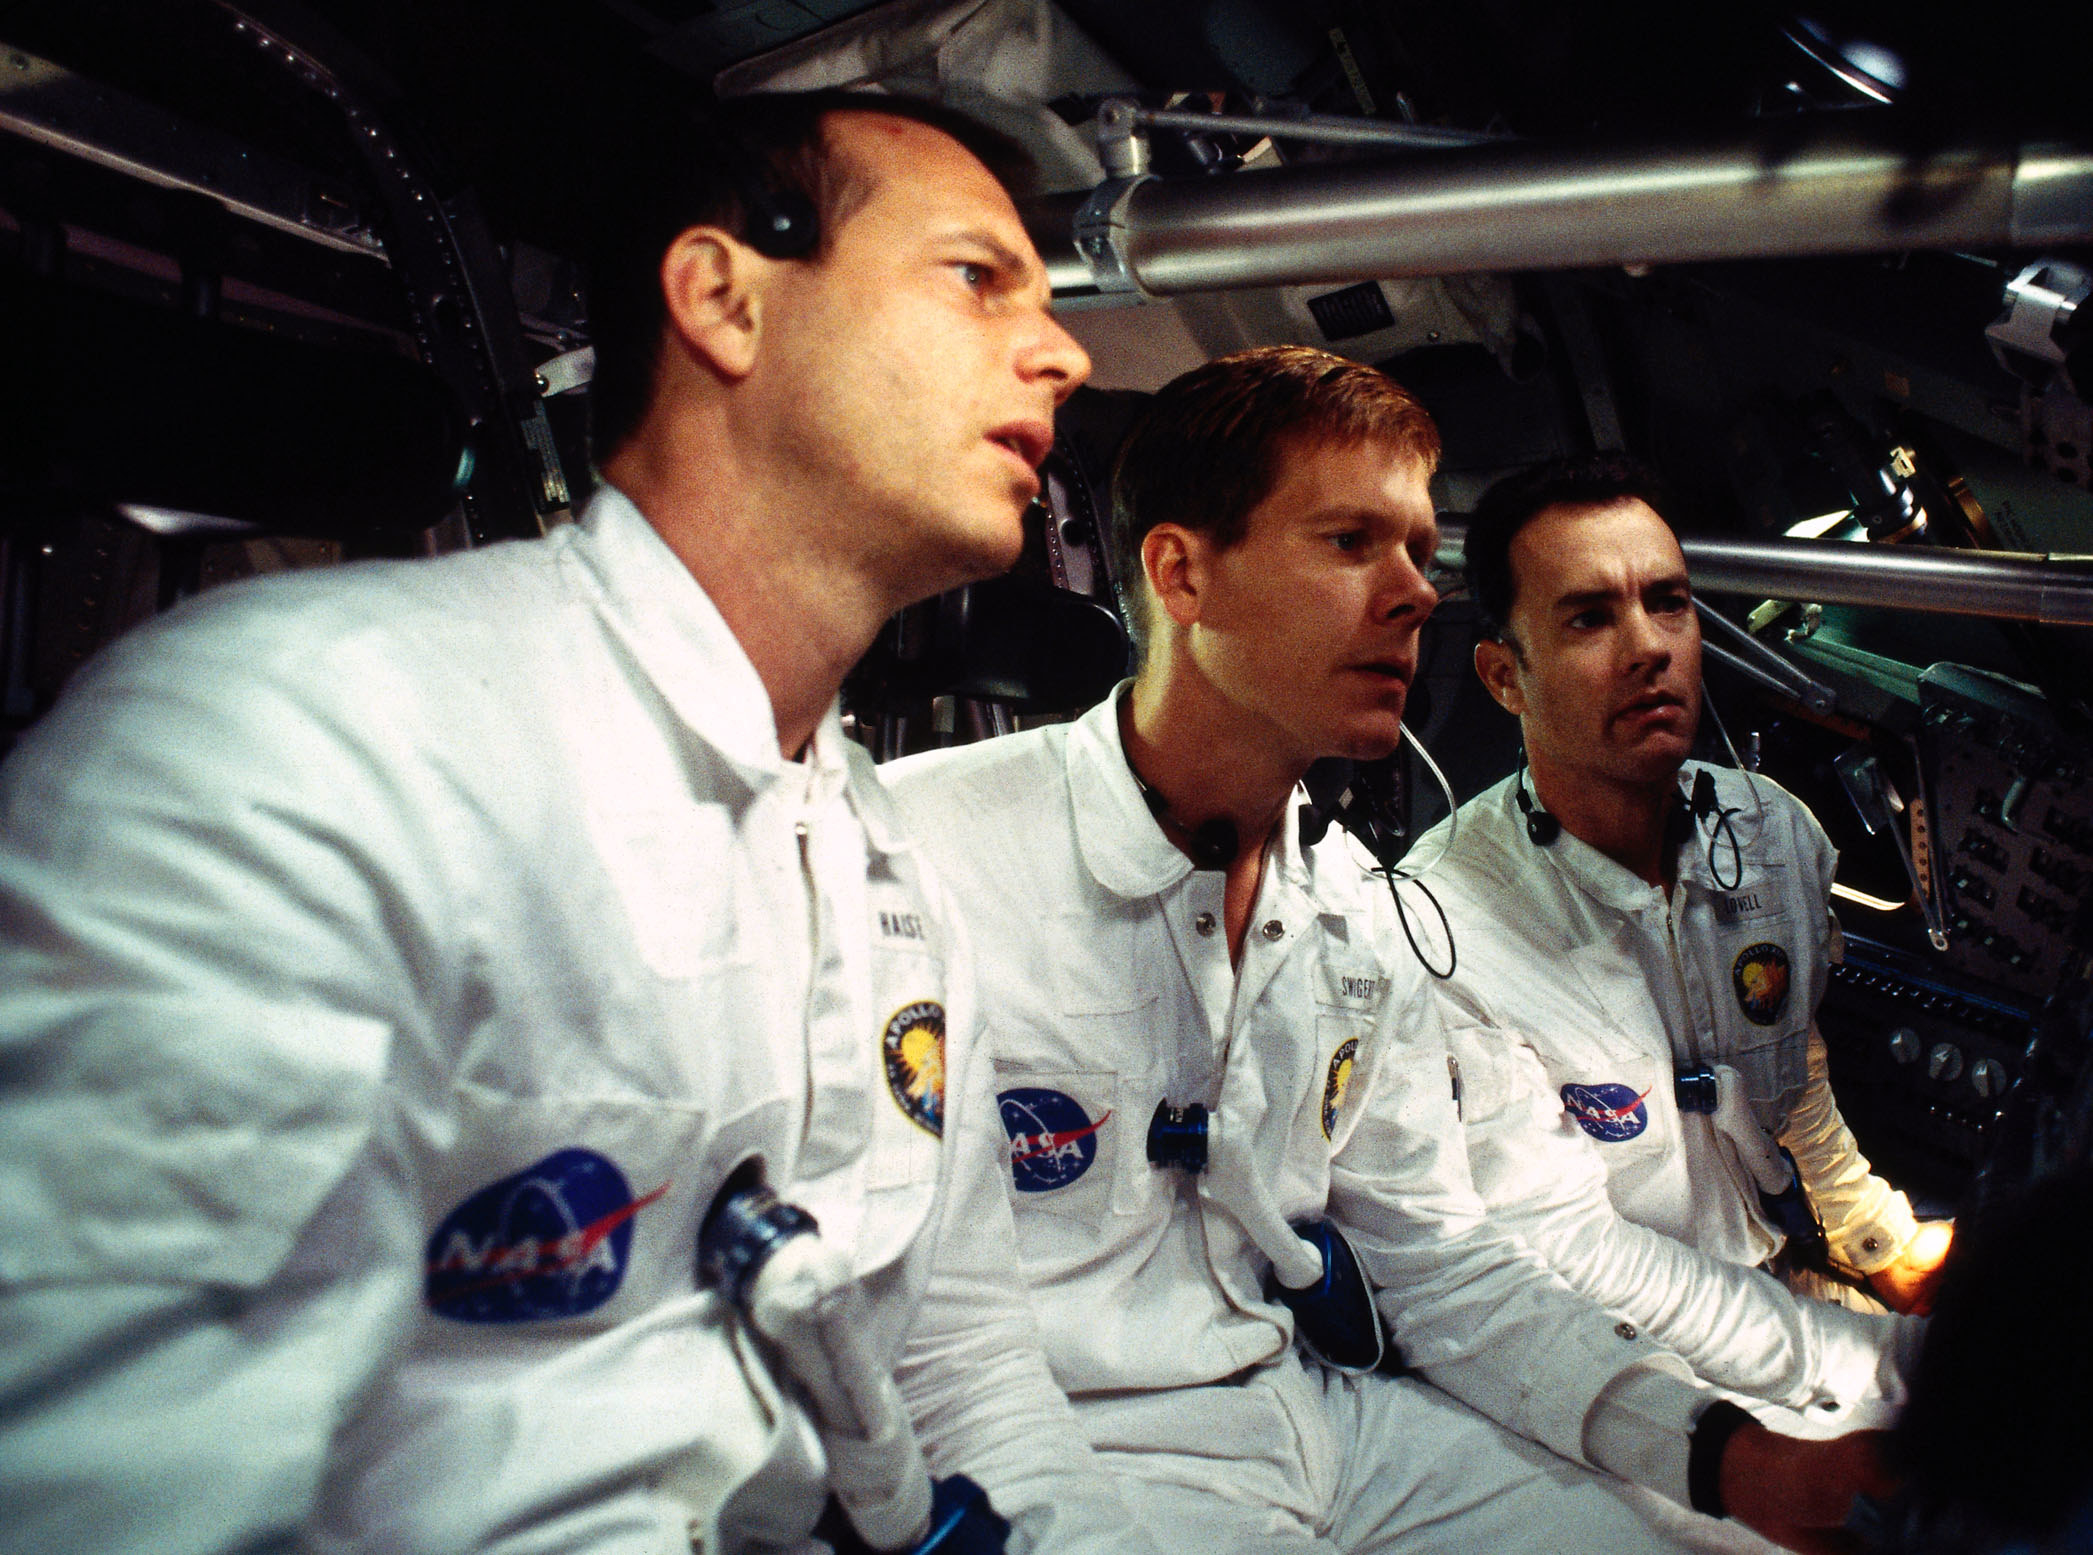 Fred Haise, Jack Swigert, and Jim Lovell wearing their NASA uniforms in the space shuttle